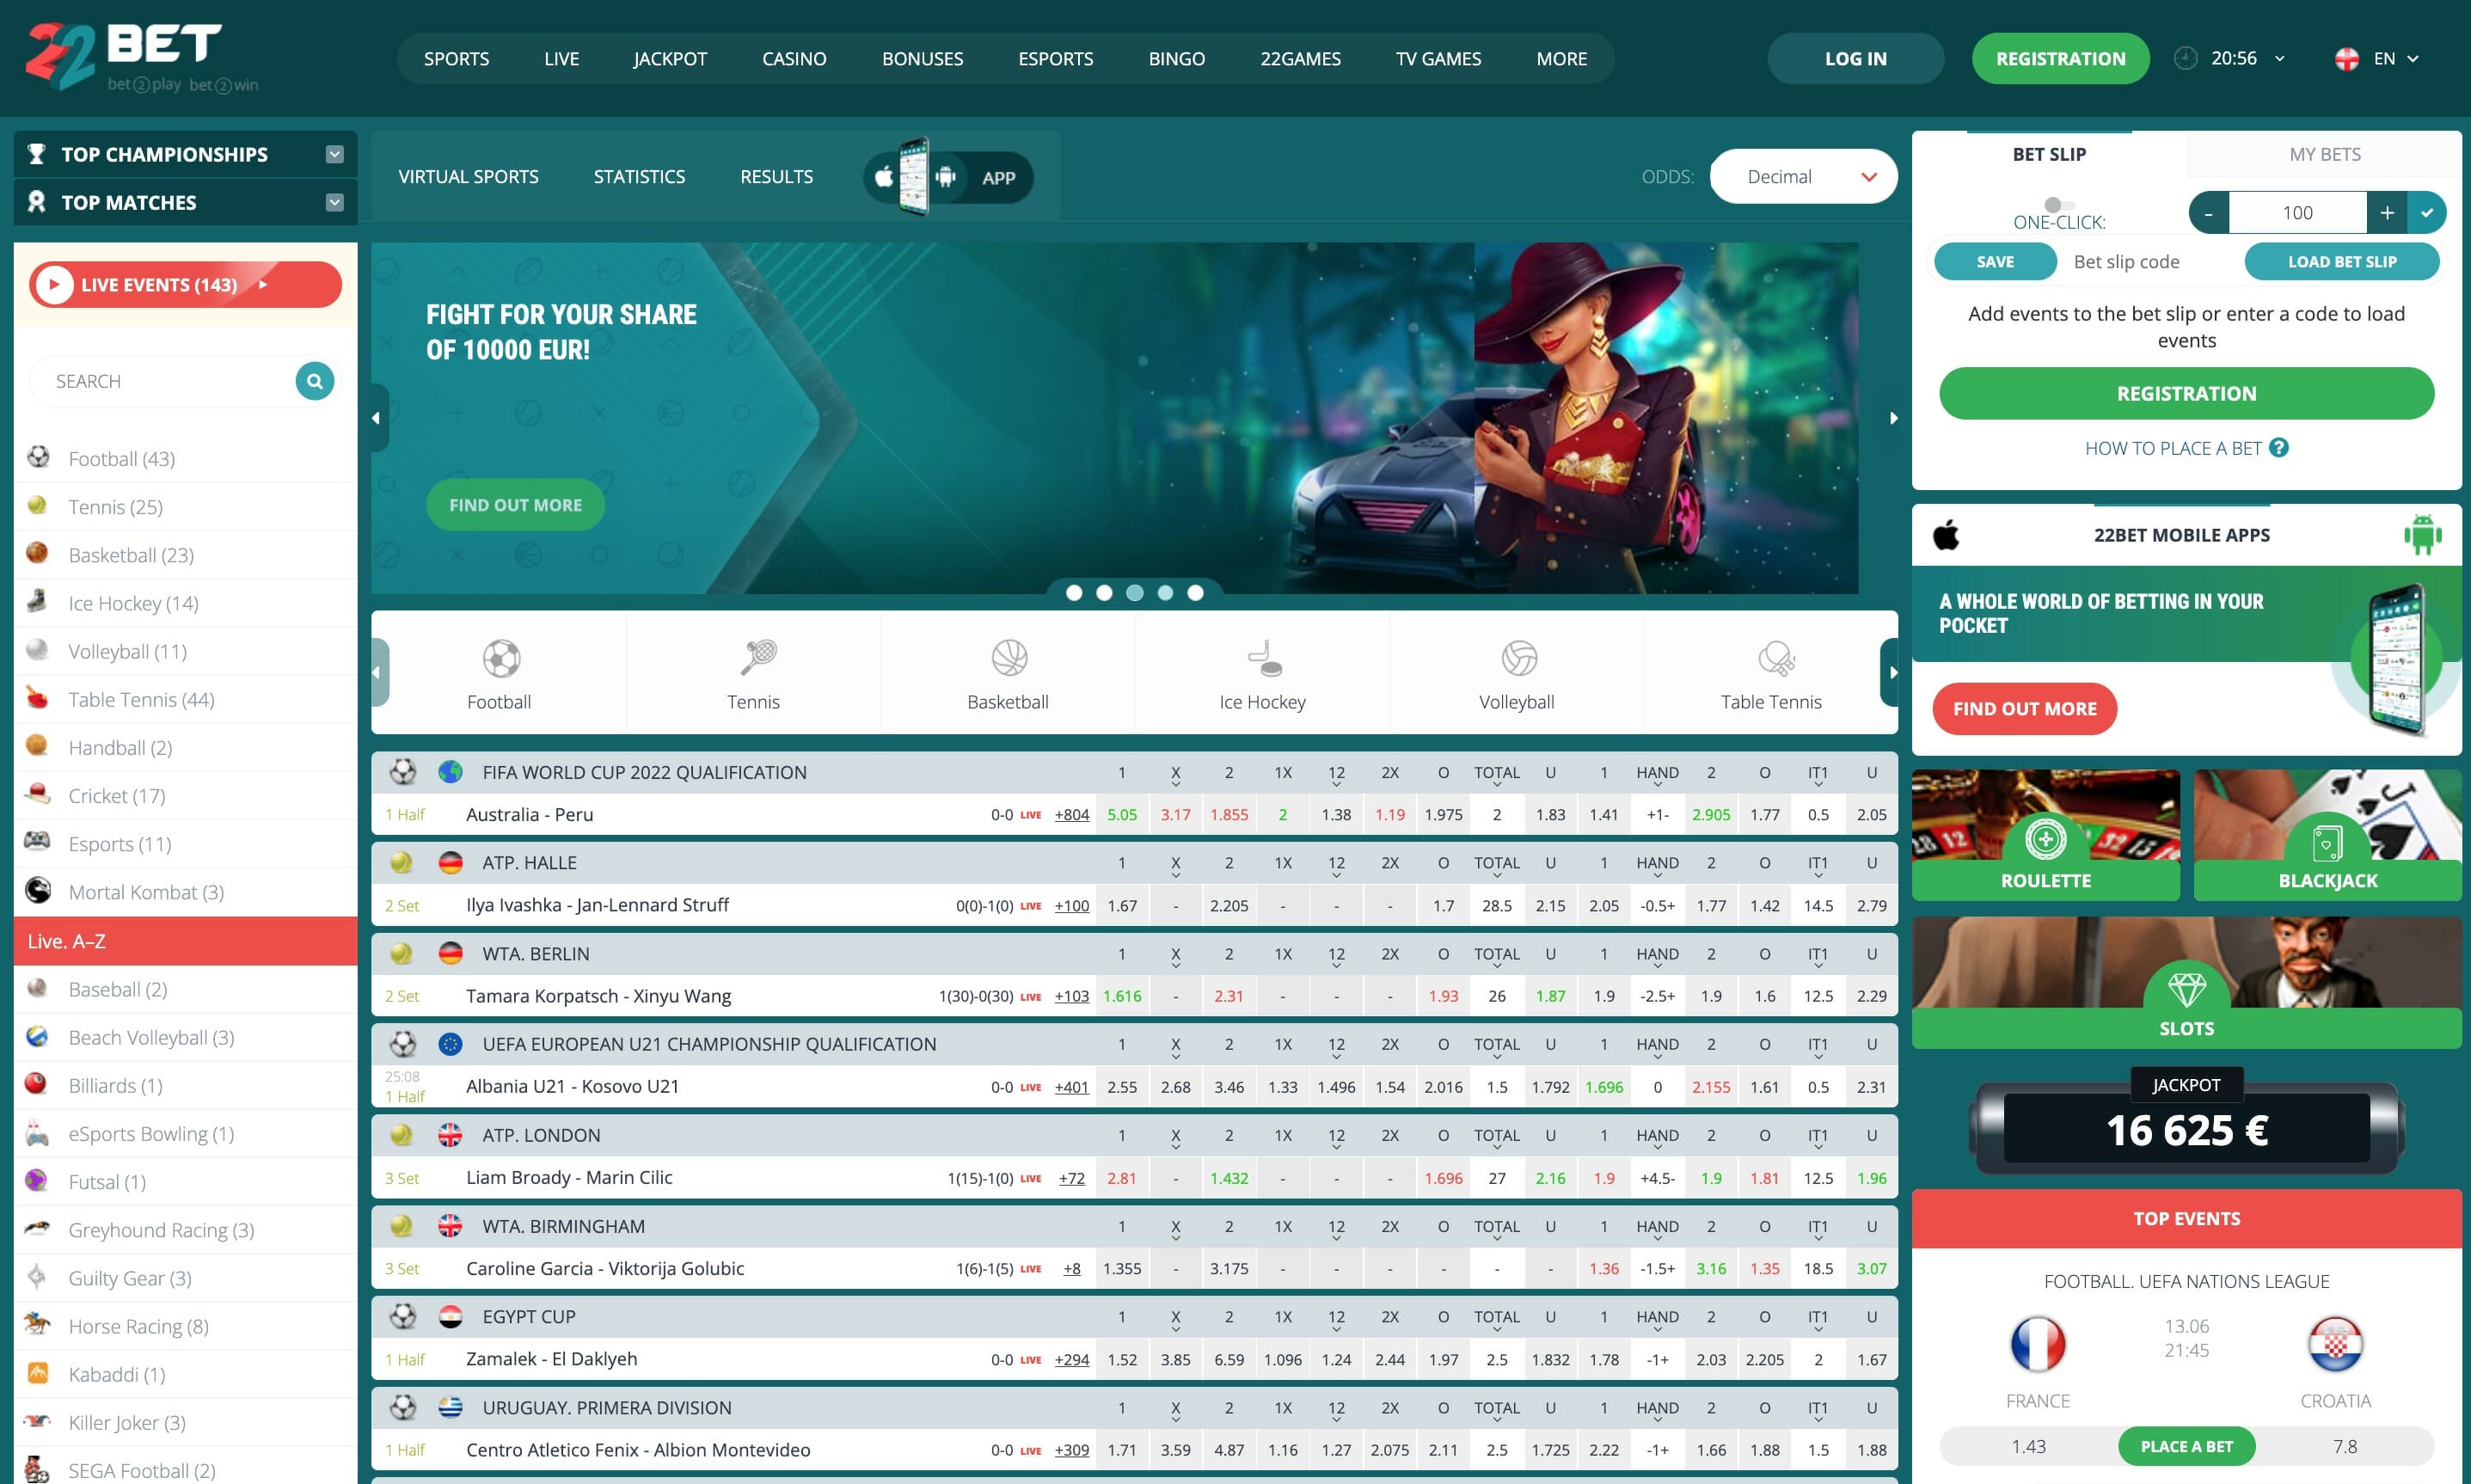 22Bet main page